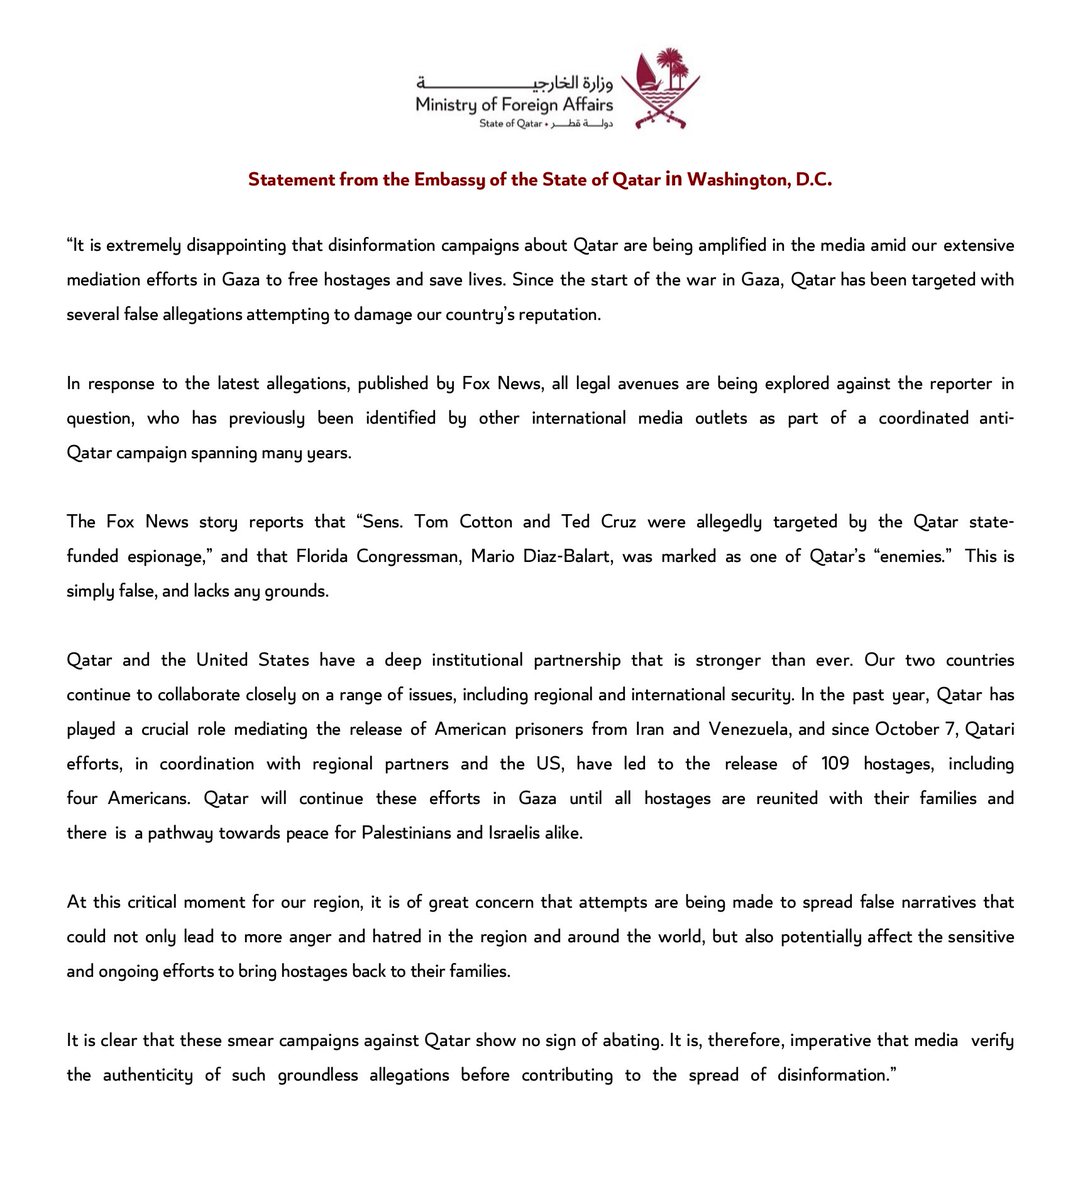 Statement from the Embassy of the State of Qatar in Washington, D.C.